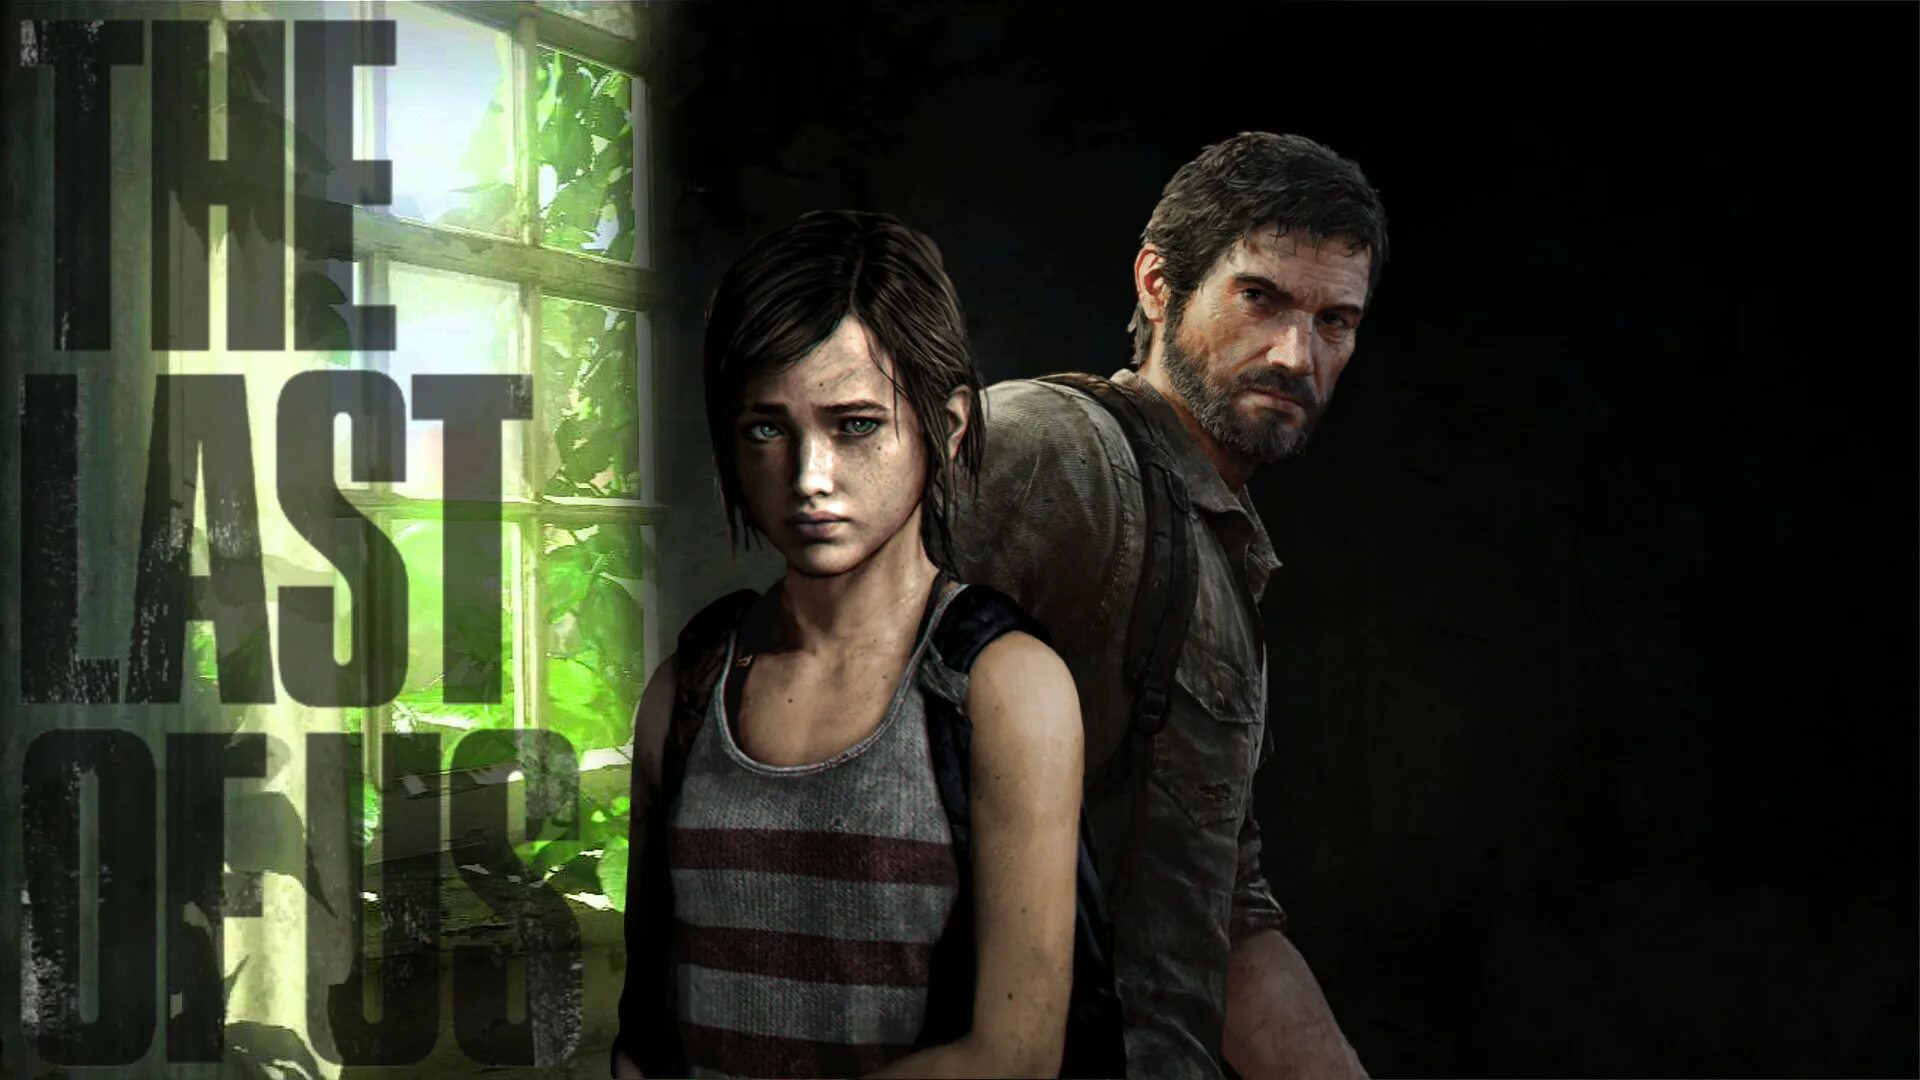 She comes the game. Ласт оф АС 1. Элли the last of us 1 Remake. The last of us (одни из нас) ps3 одни.